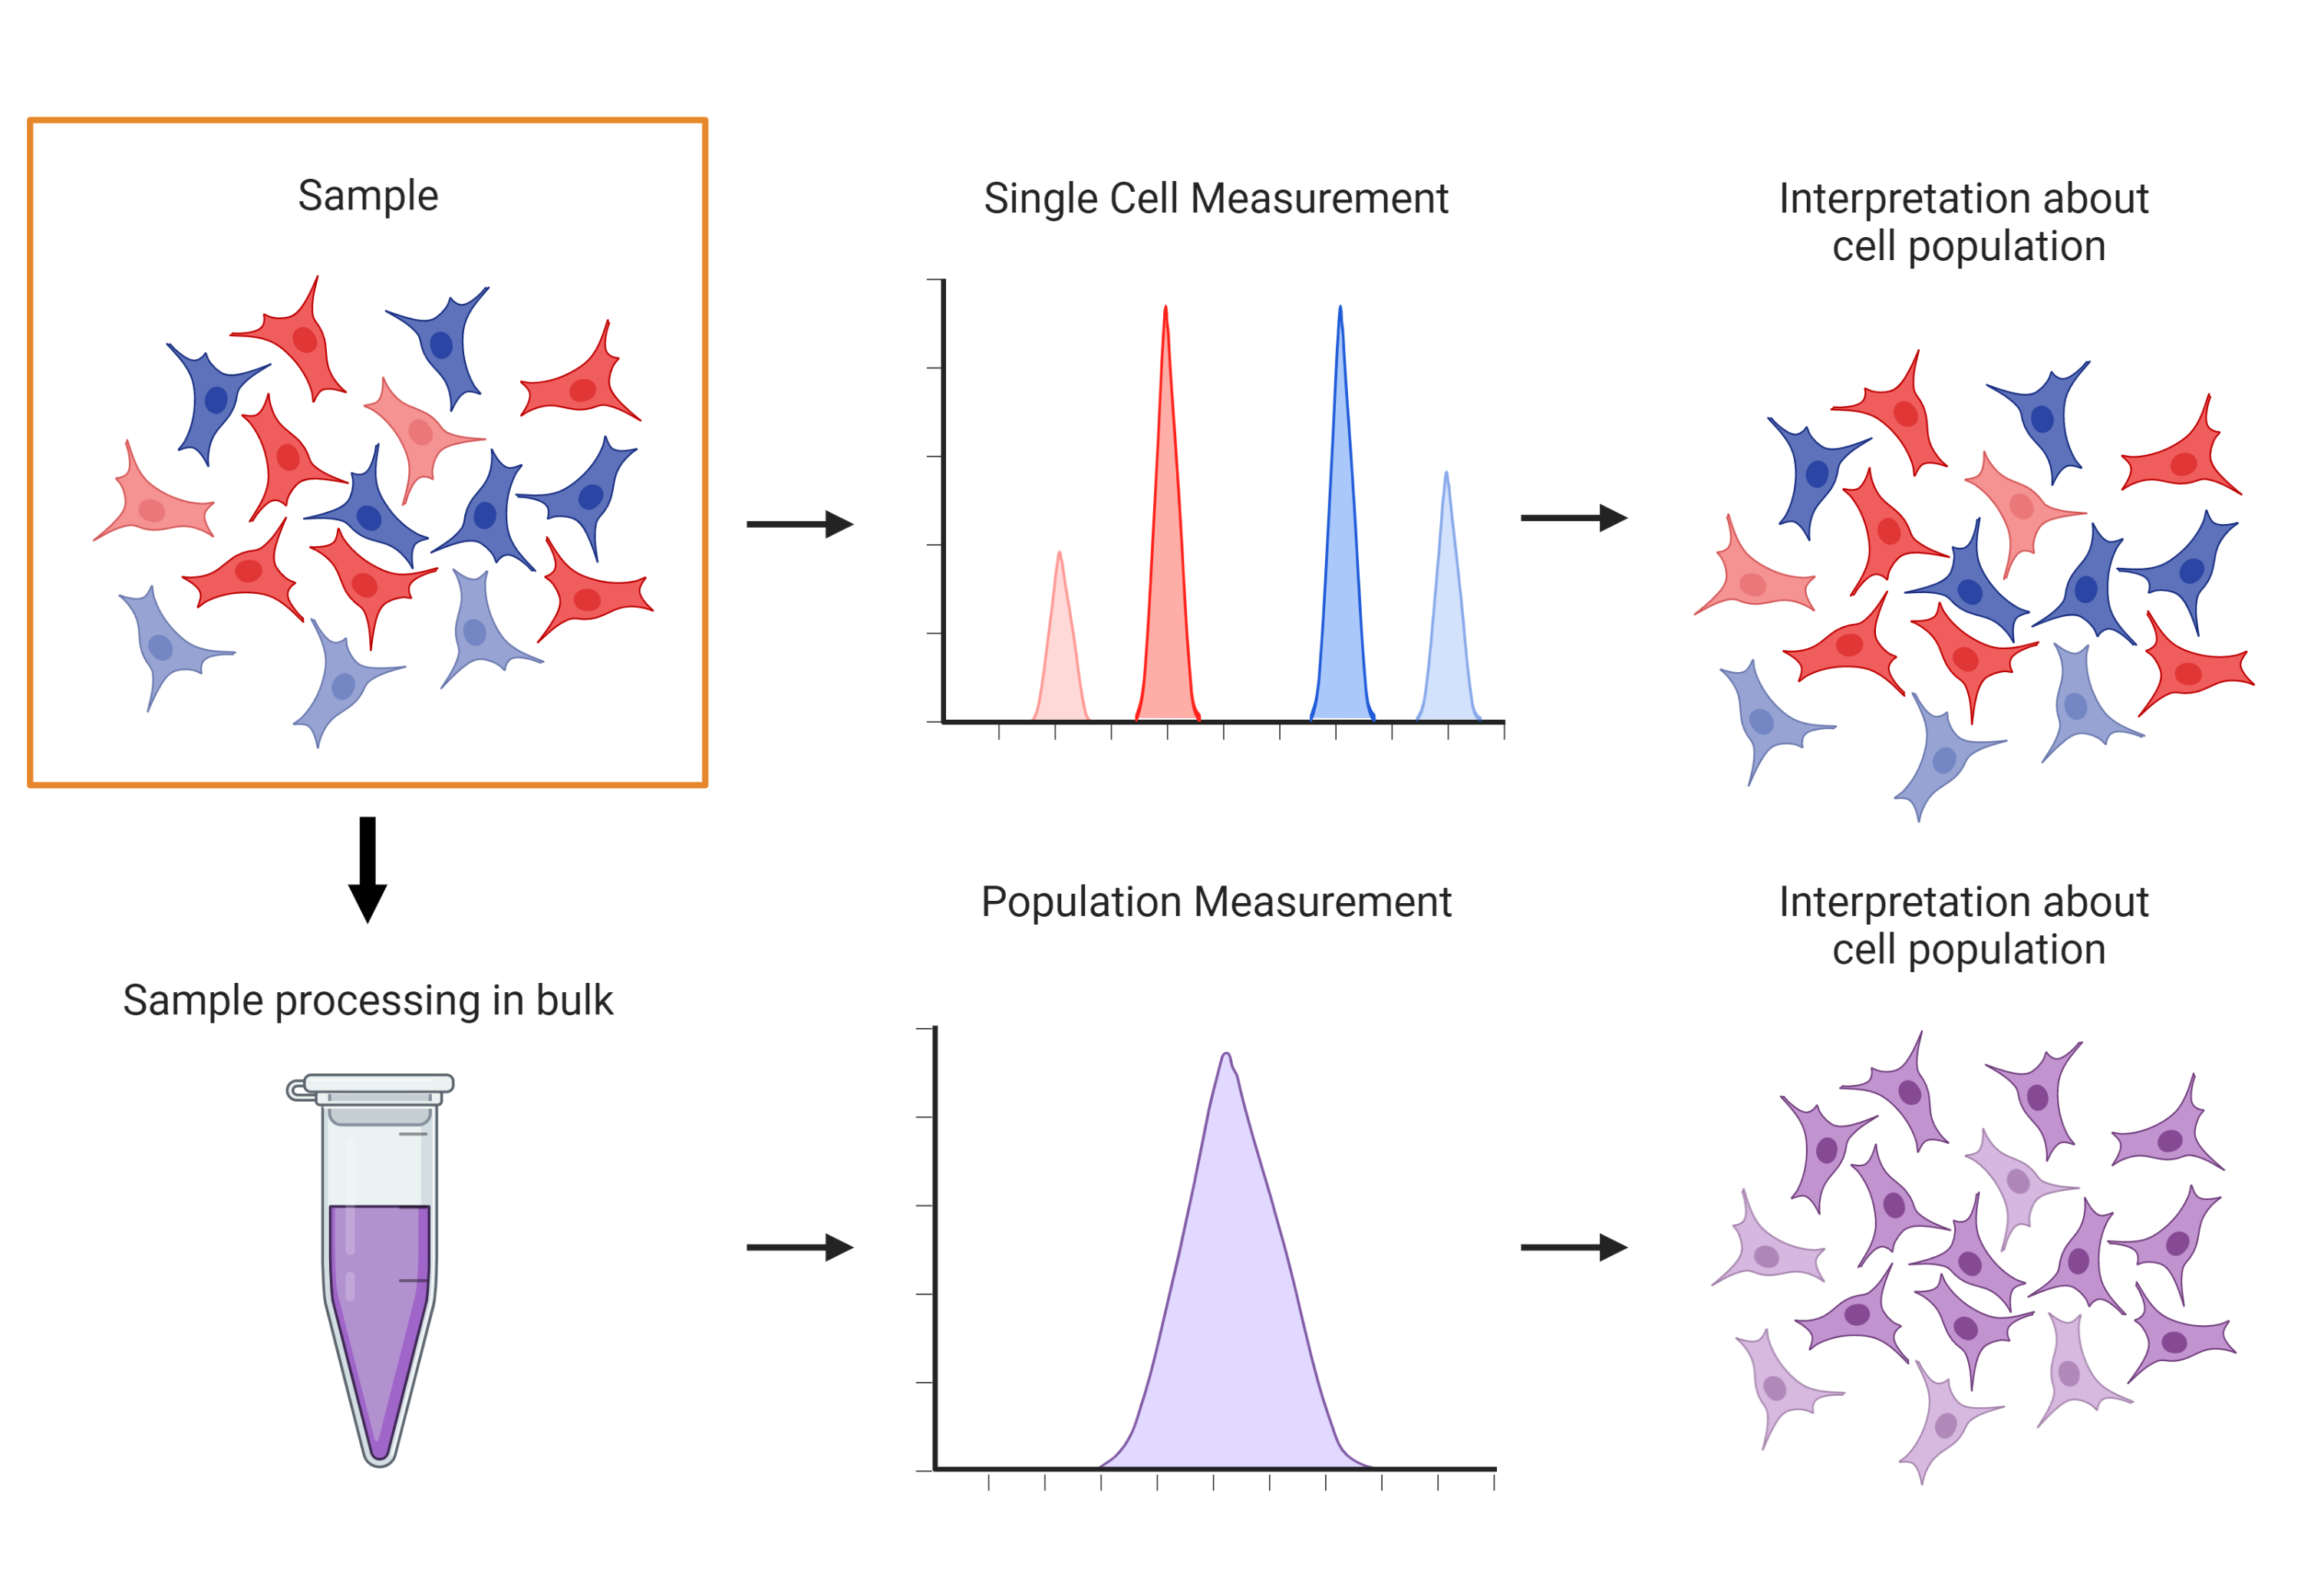 Single-cell measurements retainining individual information about individual cells